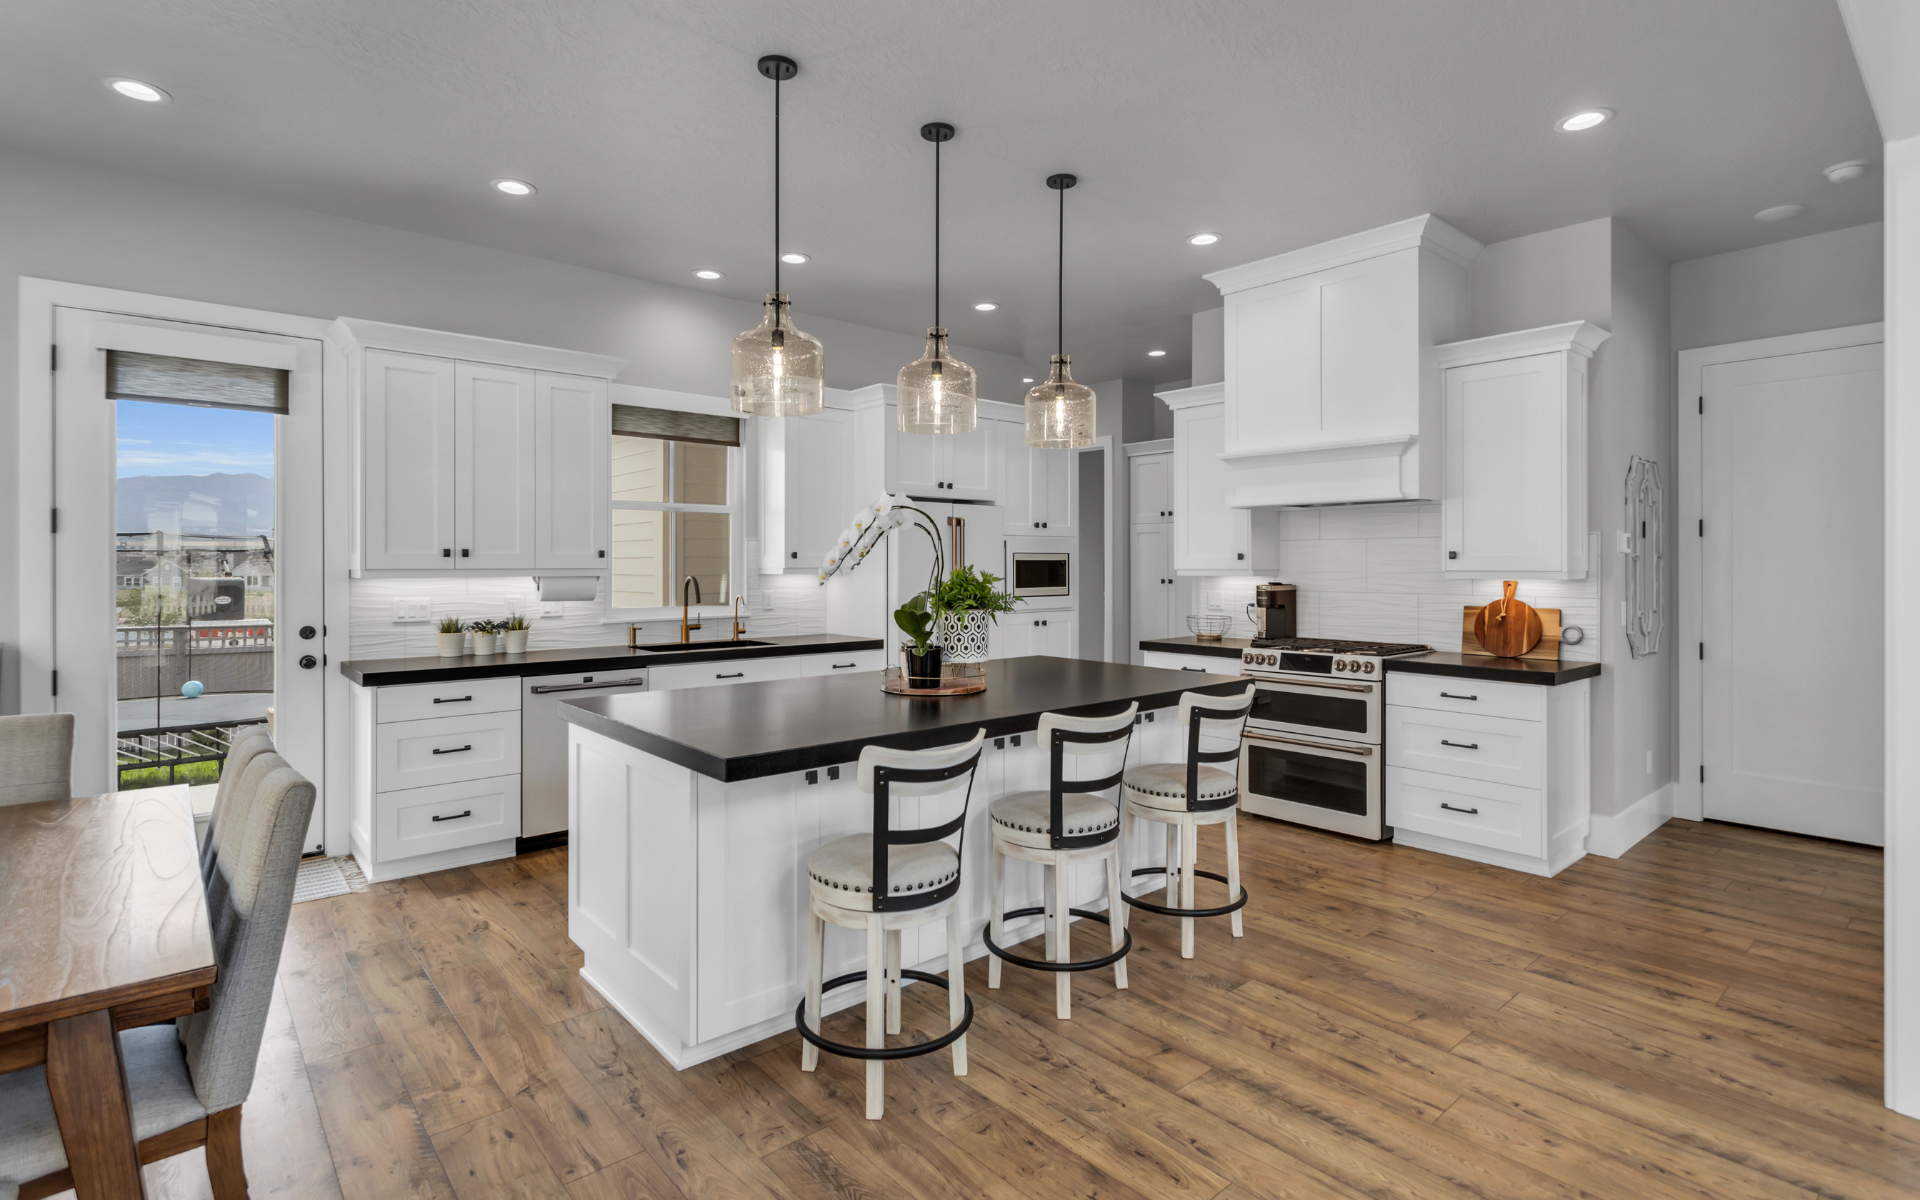 Elegant kitchen with white cabinets, black countertop, and wood flooring